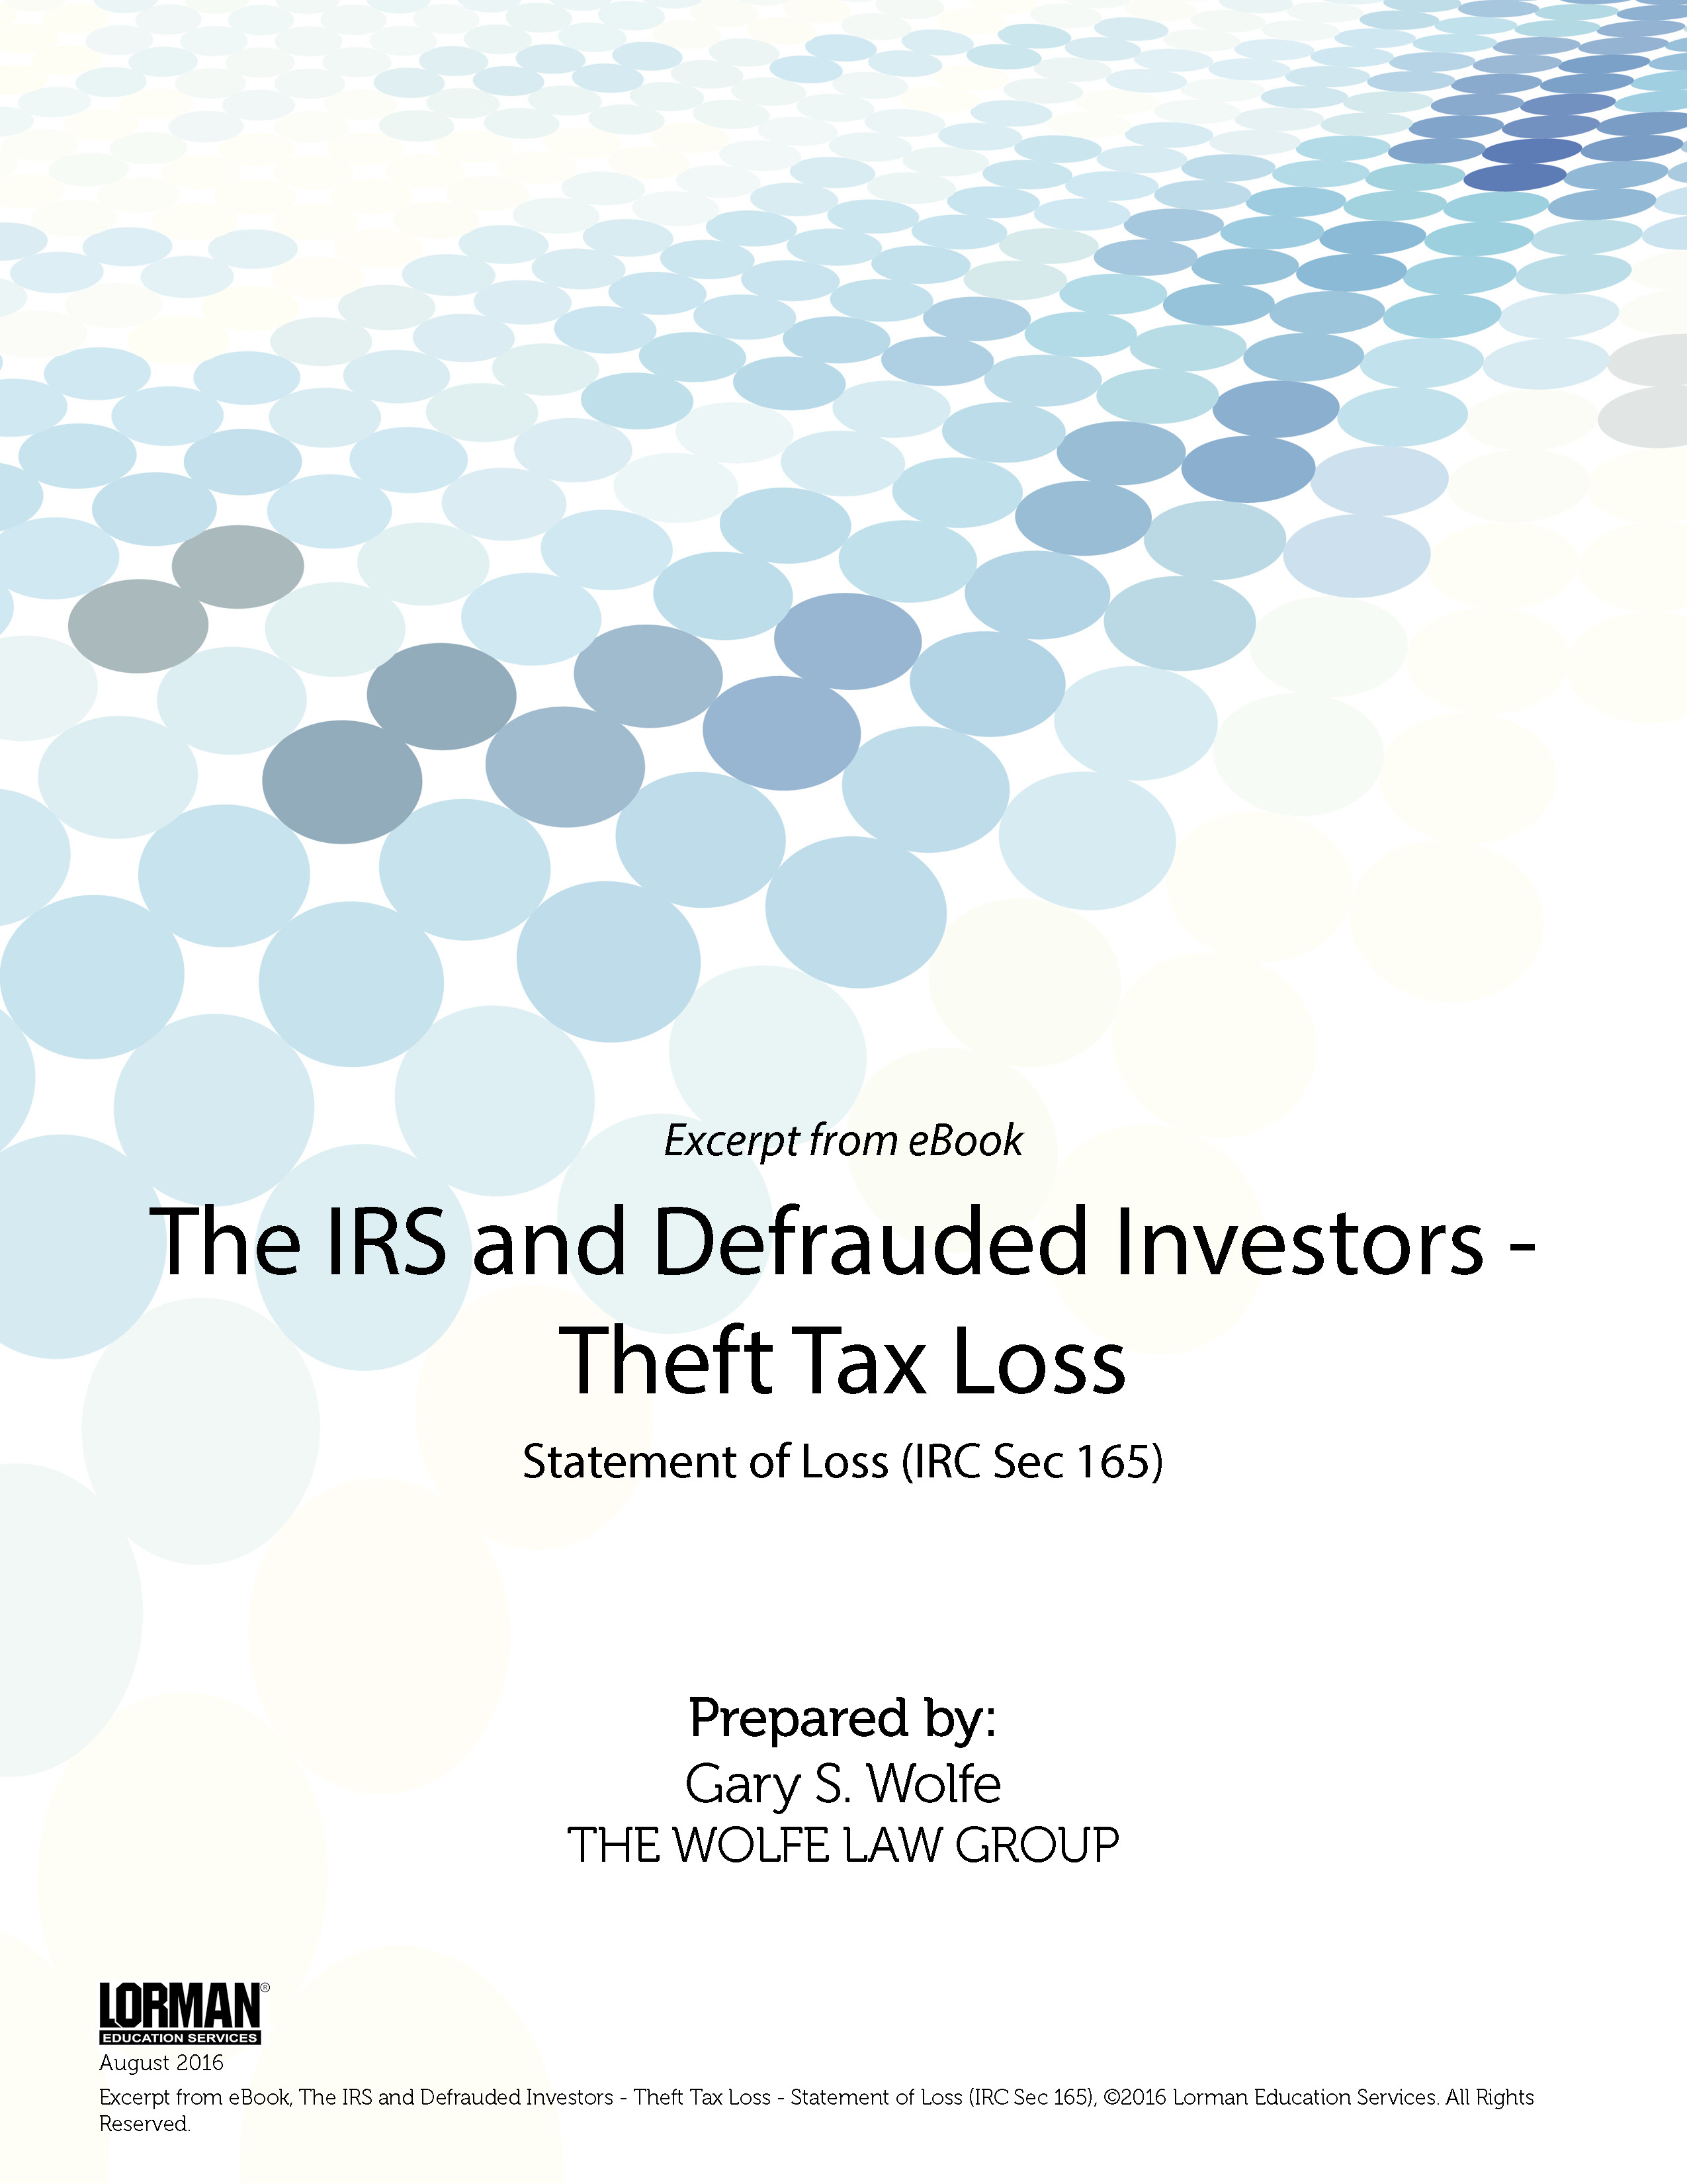 The IRS and Defrauded Investors - Theft Tax Loss: Statement of Loss (IRC Sec 165)